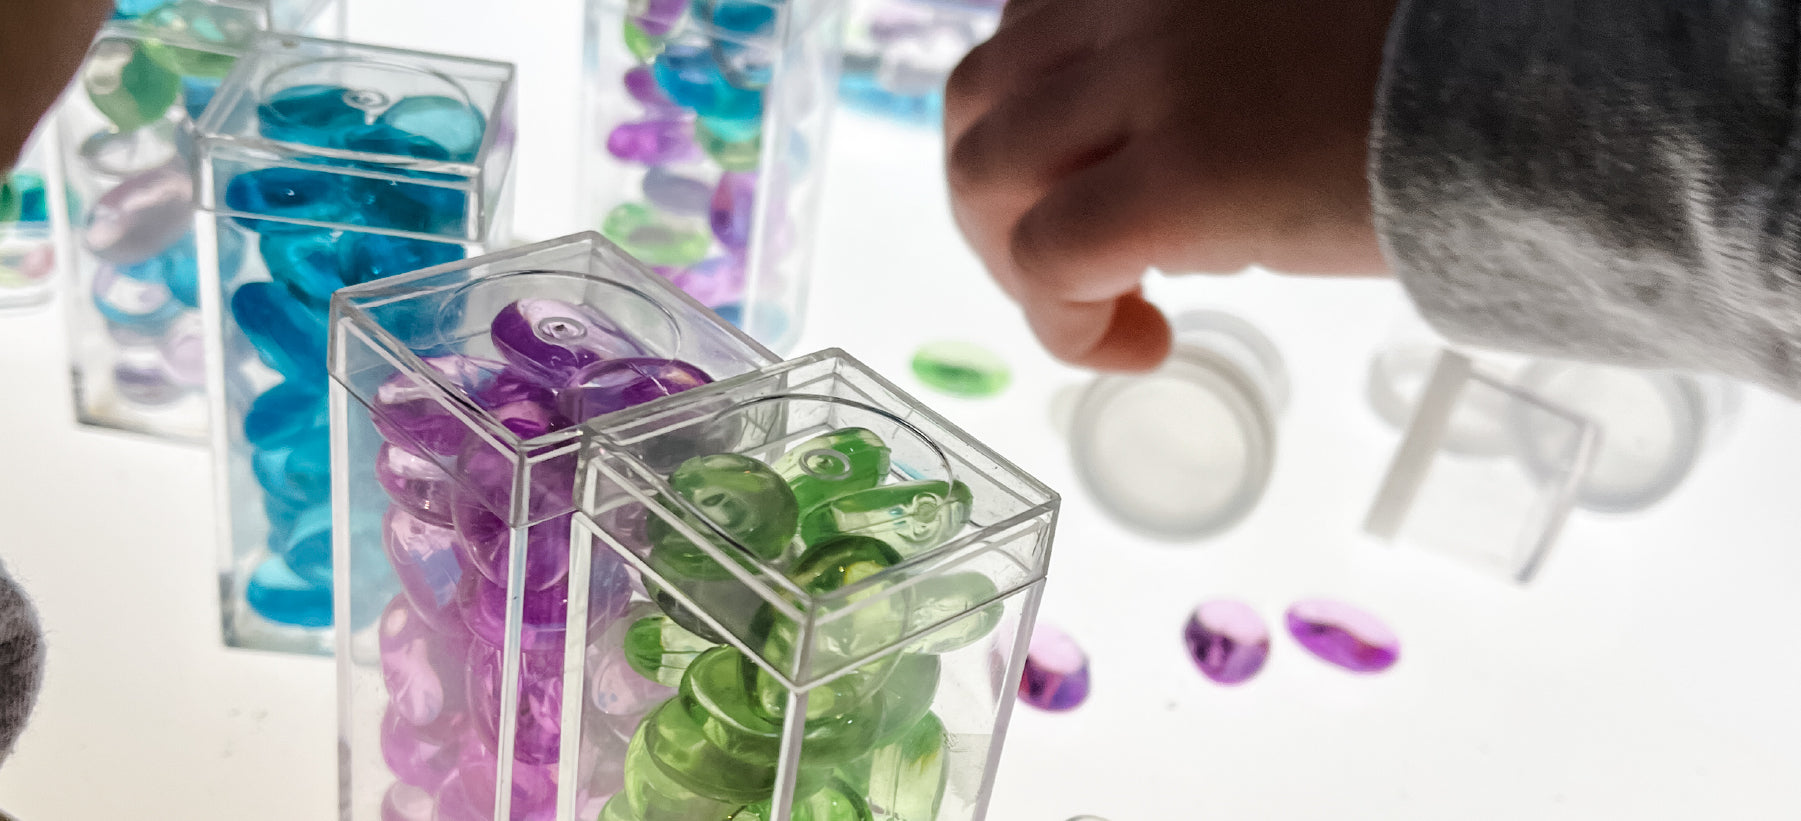 Colorful jewels in clear containers on a light table being played with by a young child